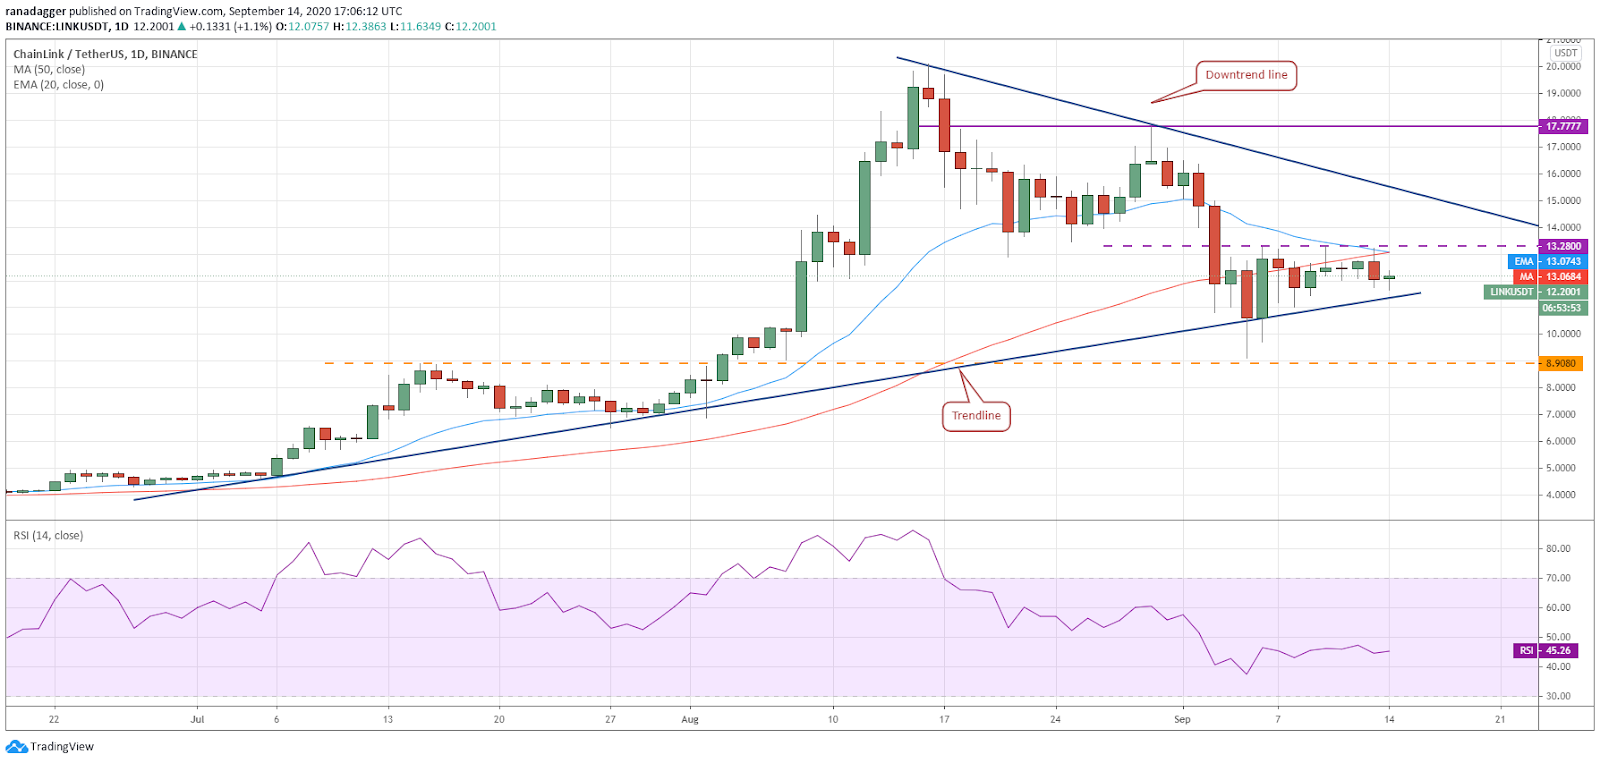 LINK/USD daily chart. Source: TradingView​​​​​​​